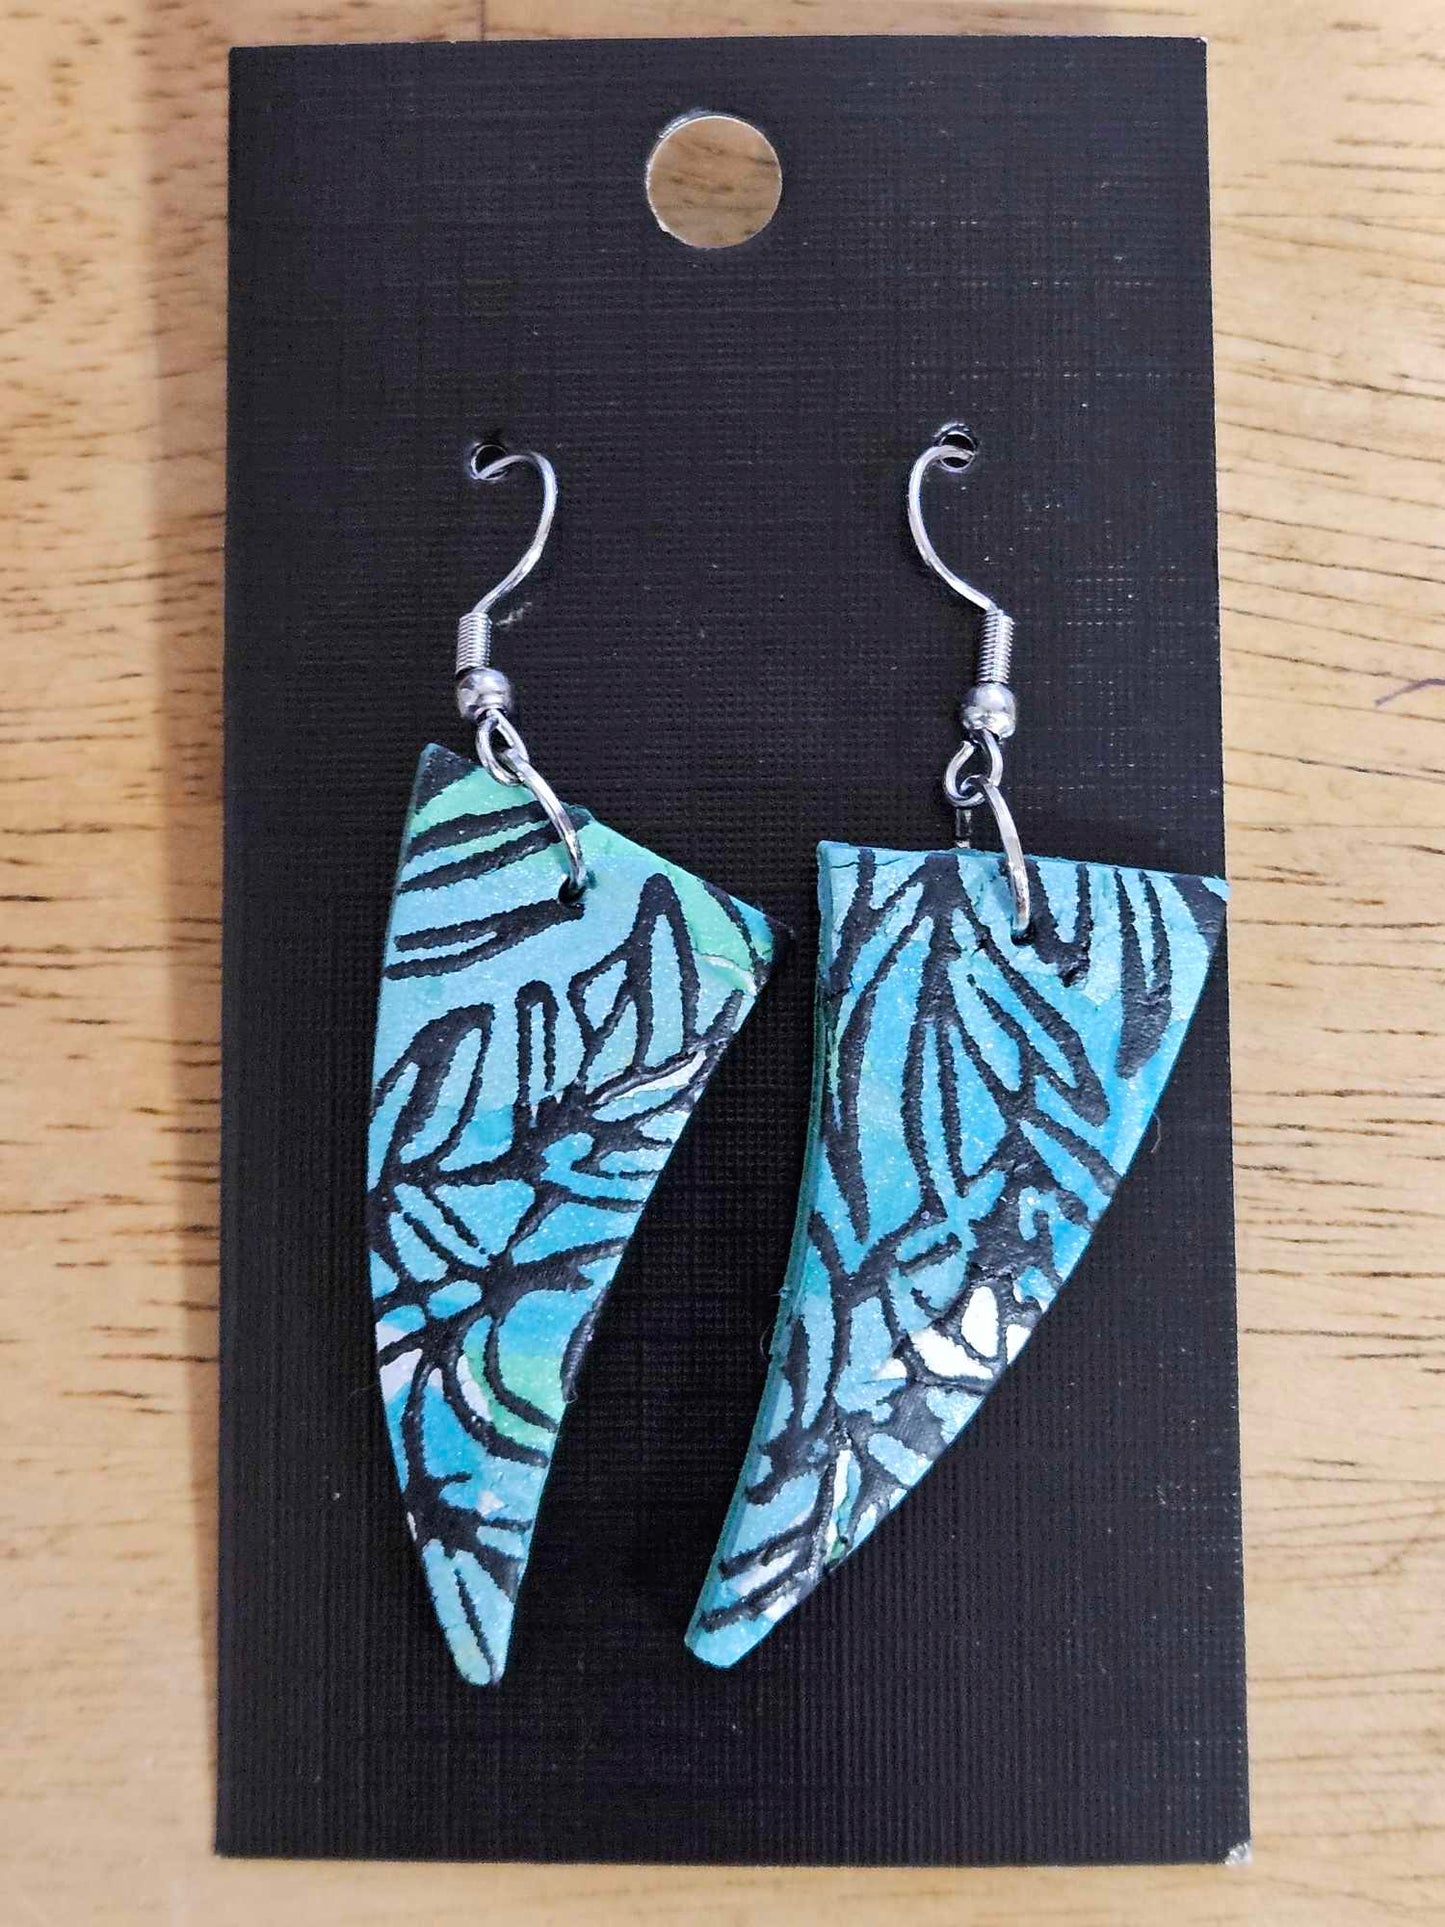 Spring Clay Earrings By Local Artist